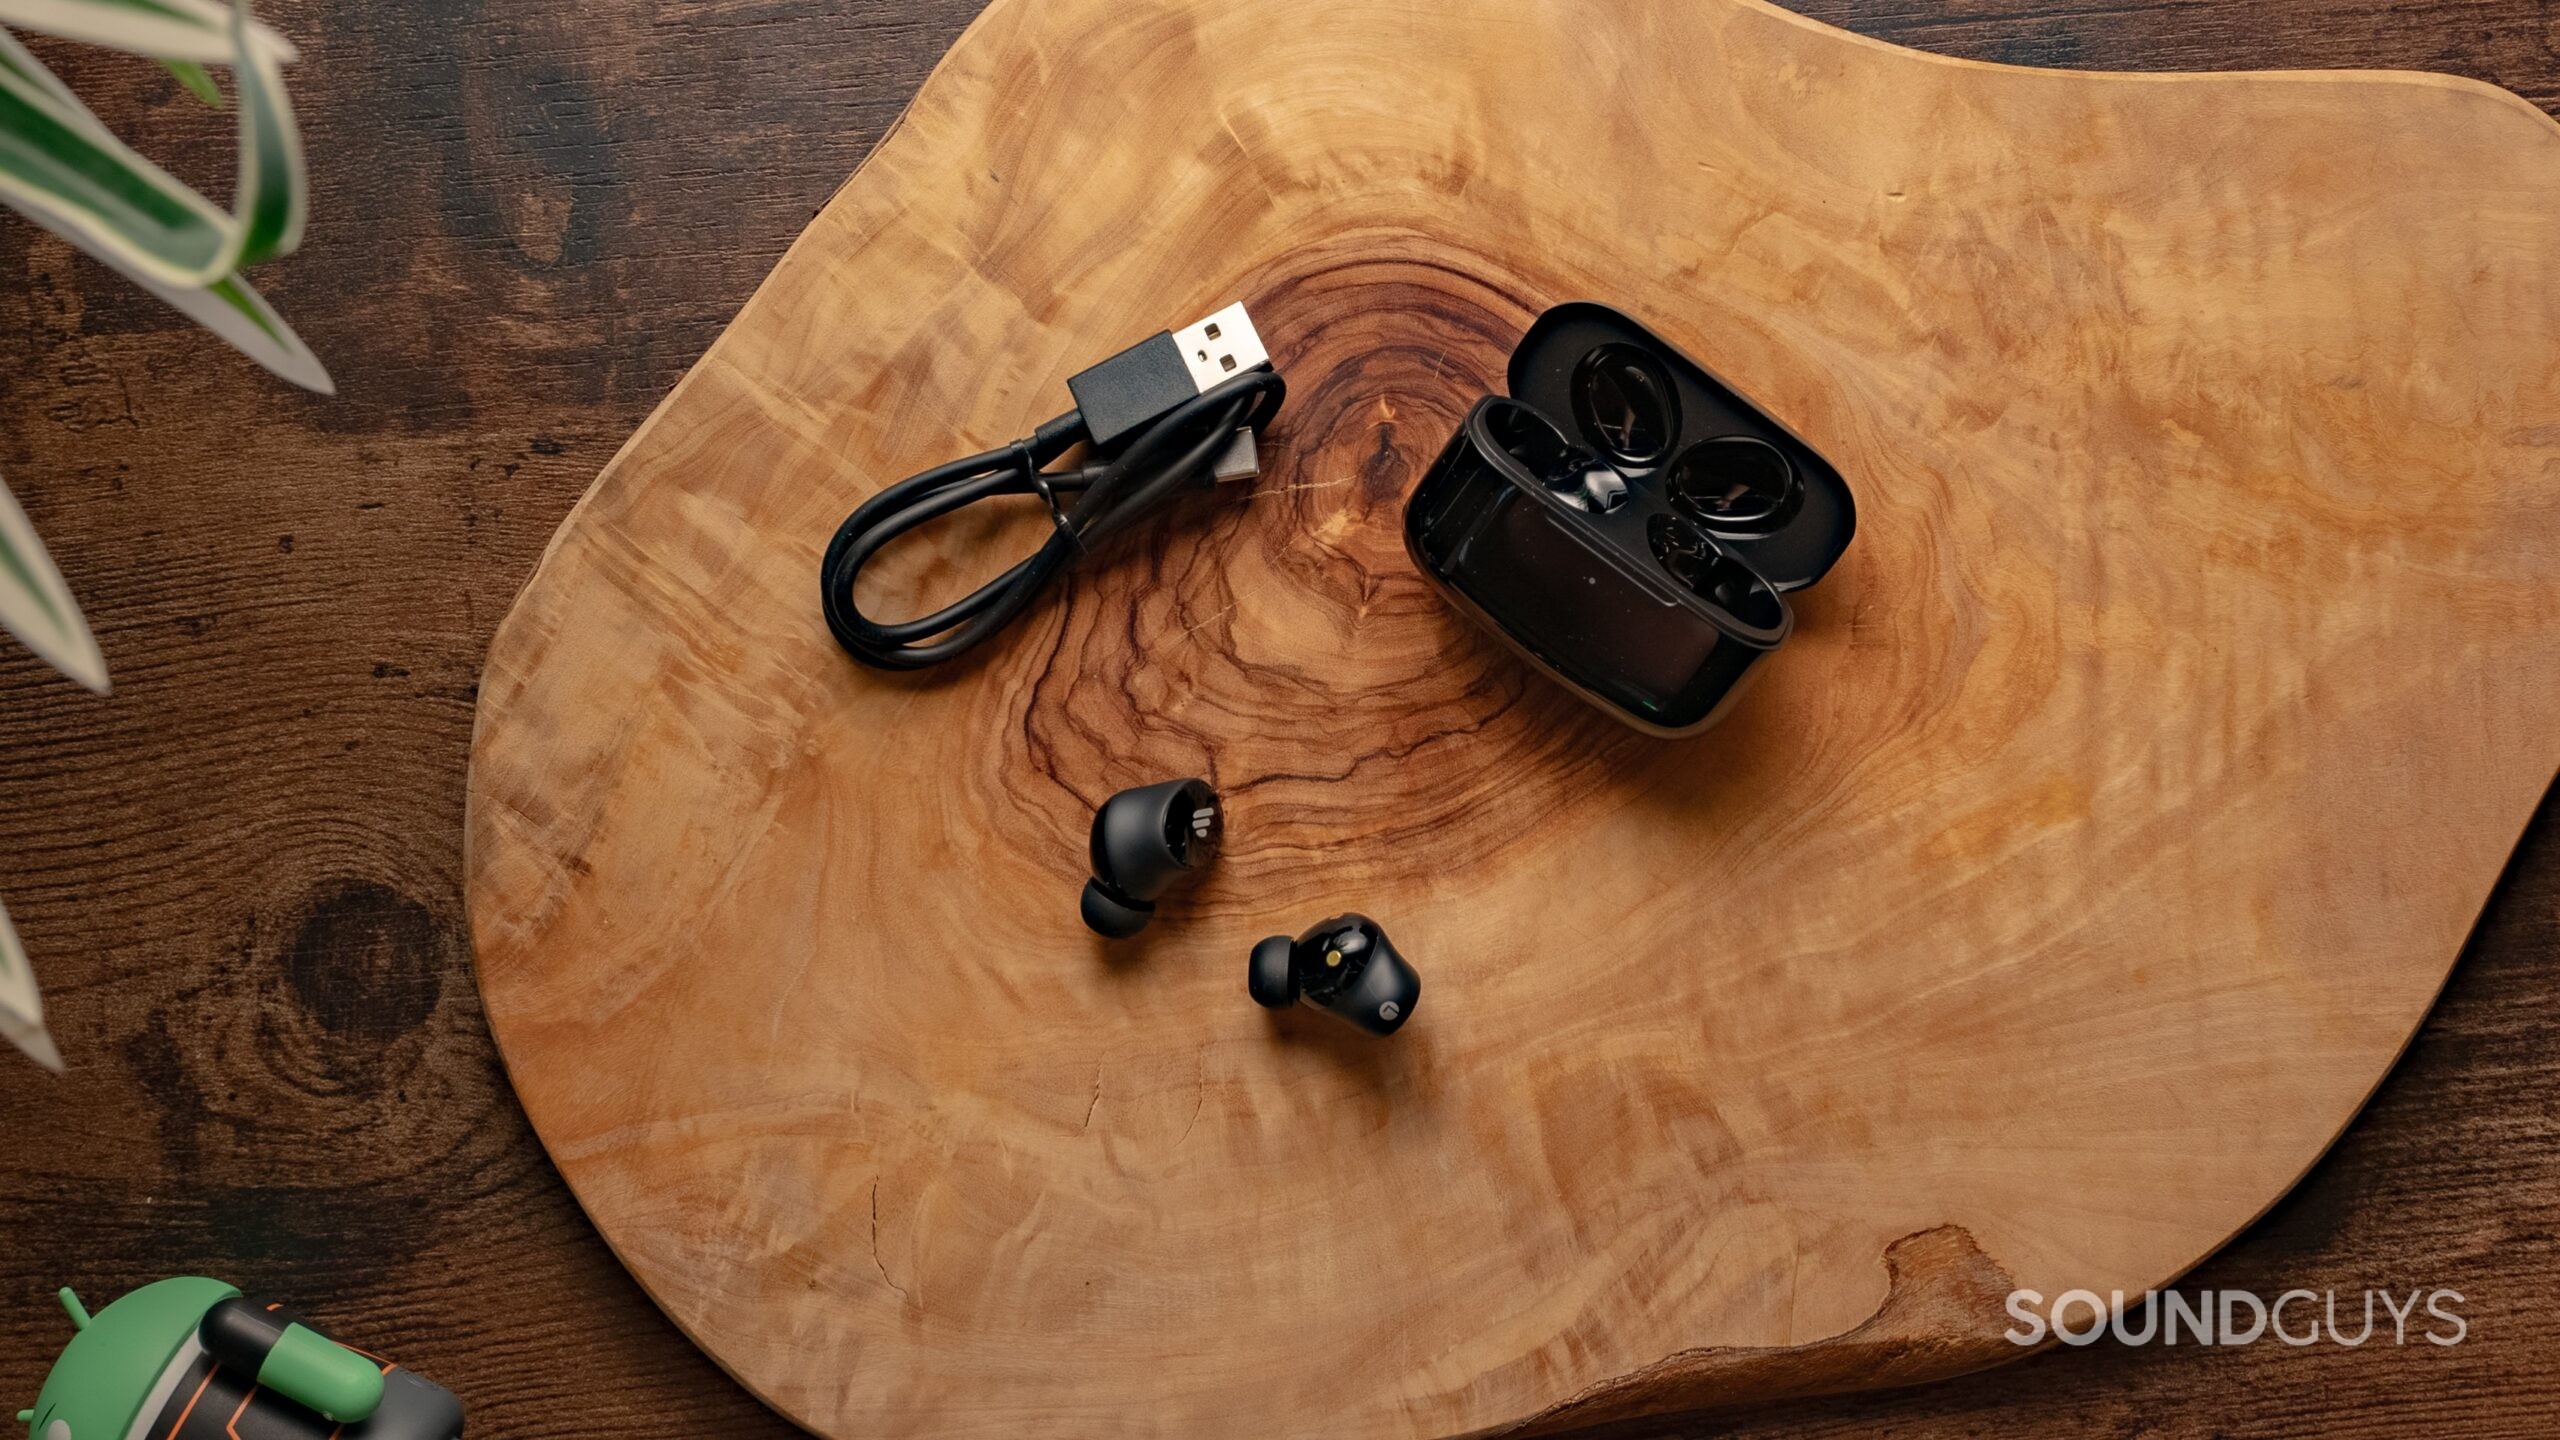 Edifier TWS1 Pro 2 earbuds, case, and charging cable on wood table.